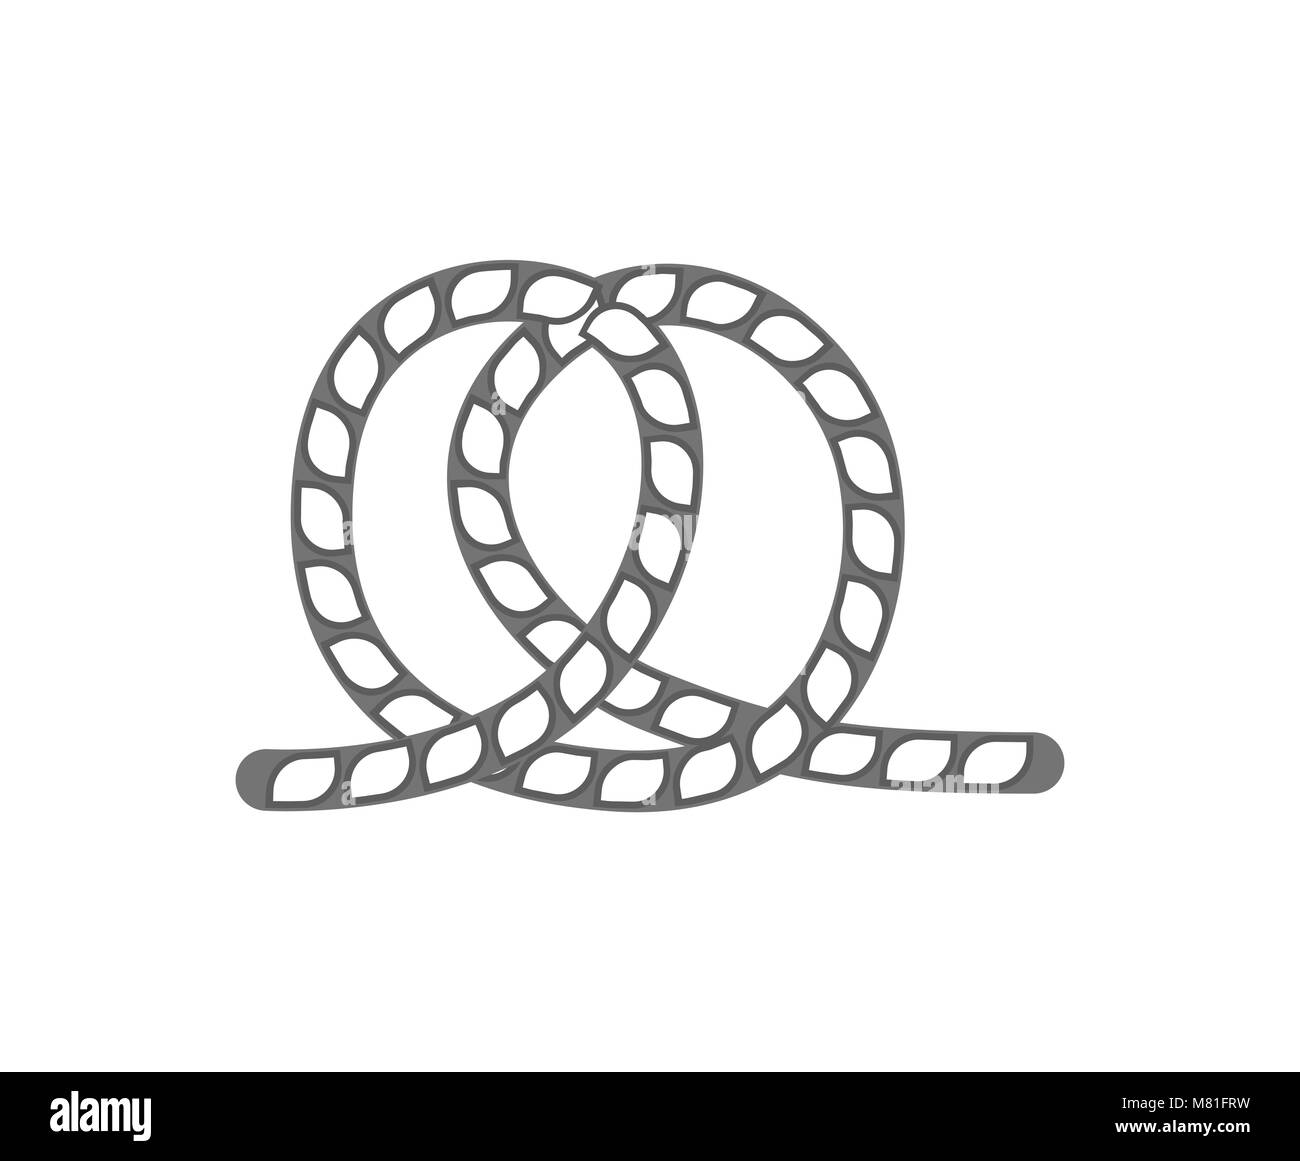 Bowline knot Black and White Stock Photos & Images - Alamy